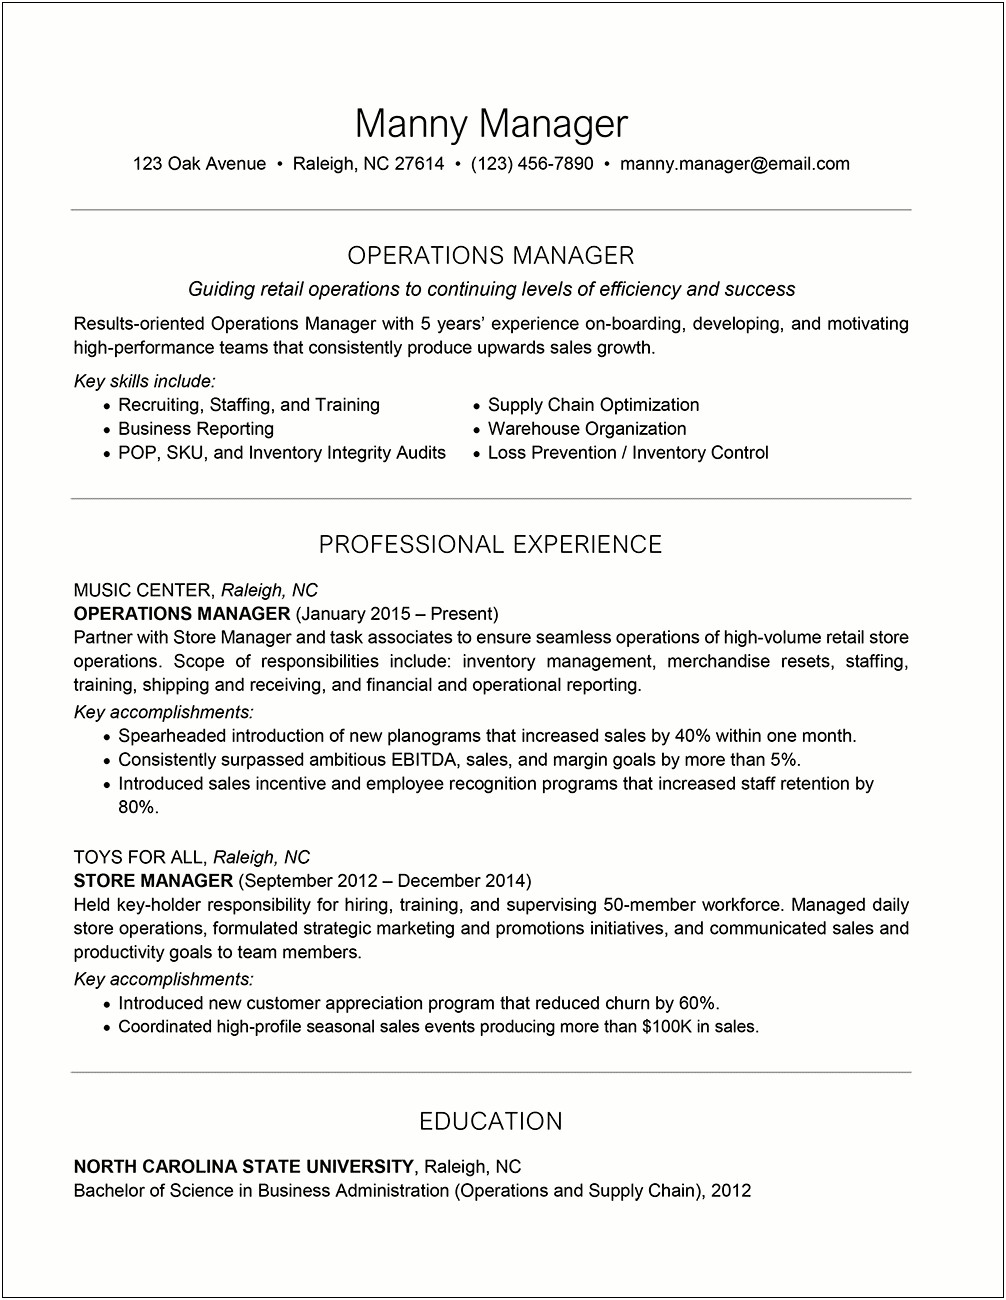 Resume For Management Position Template